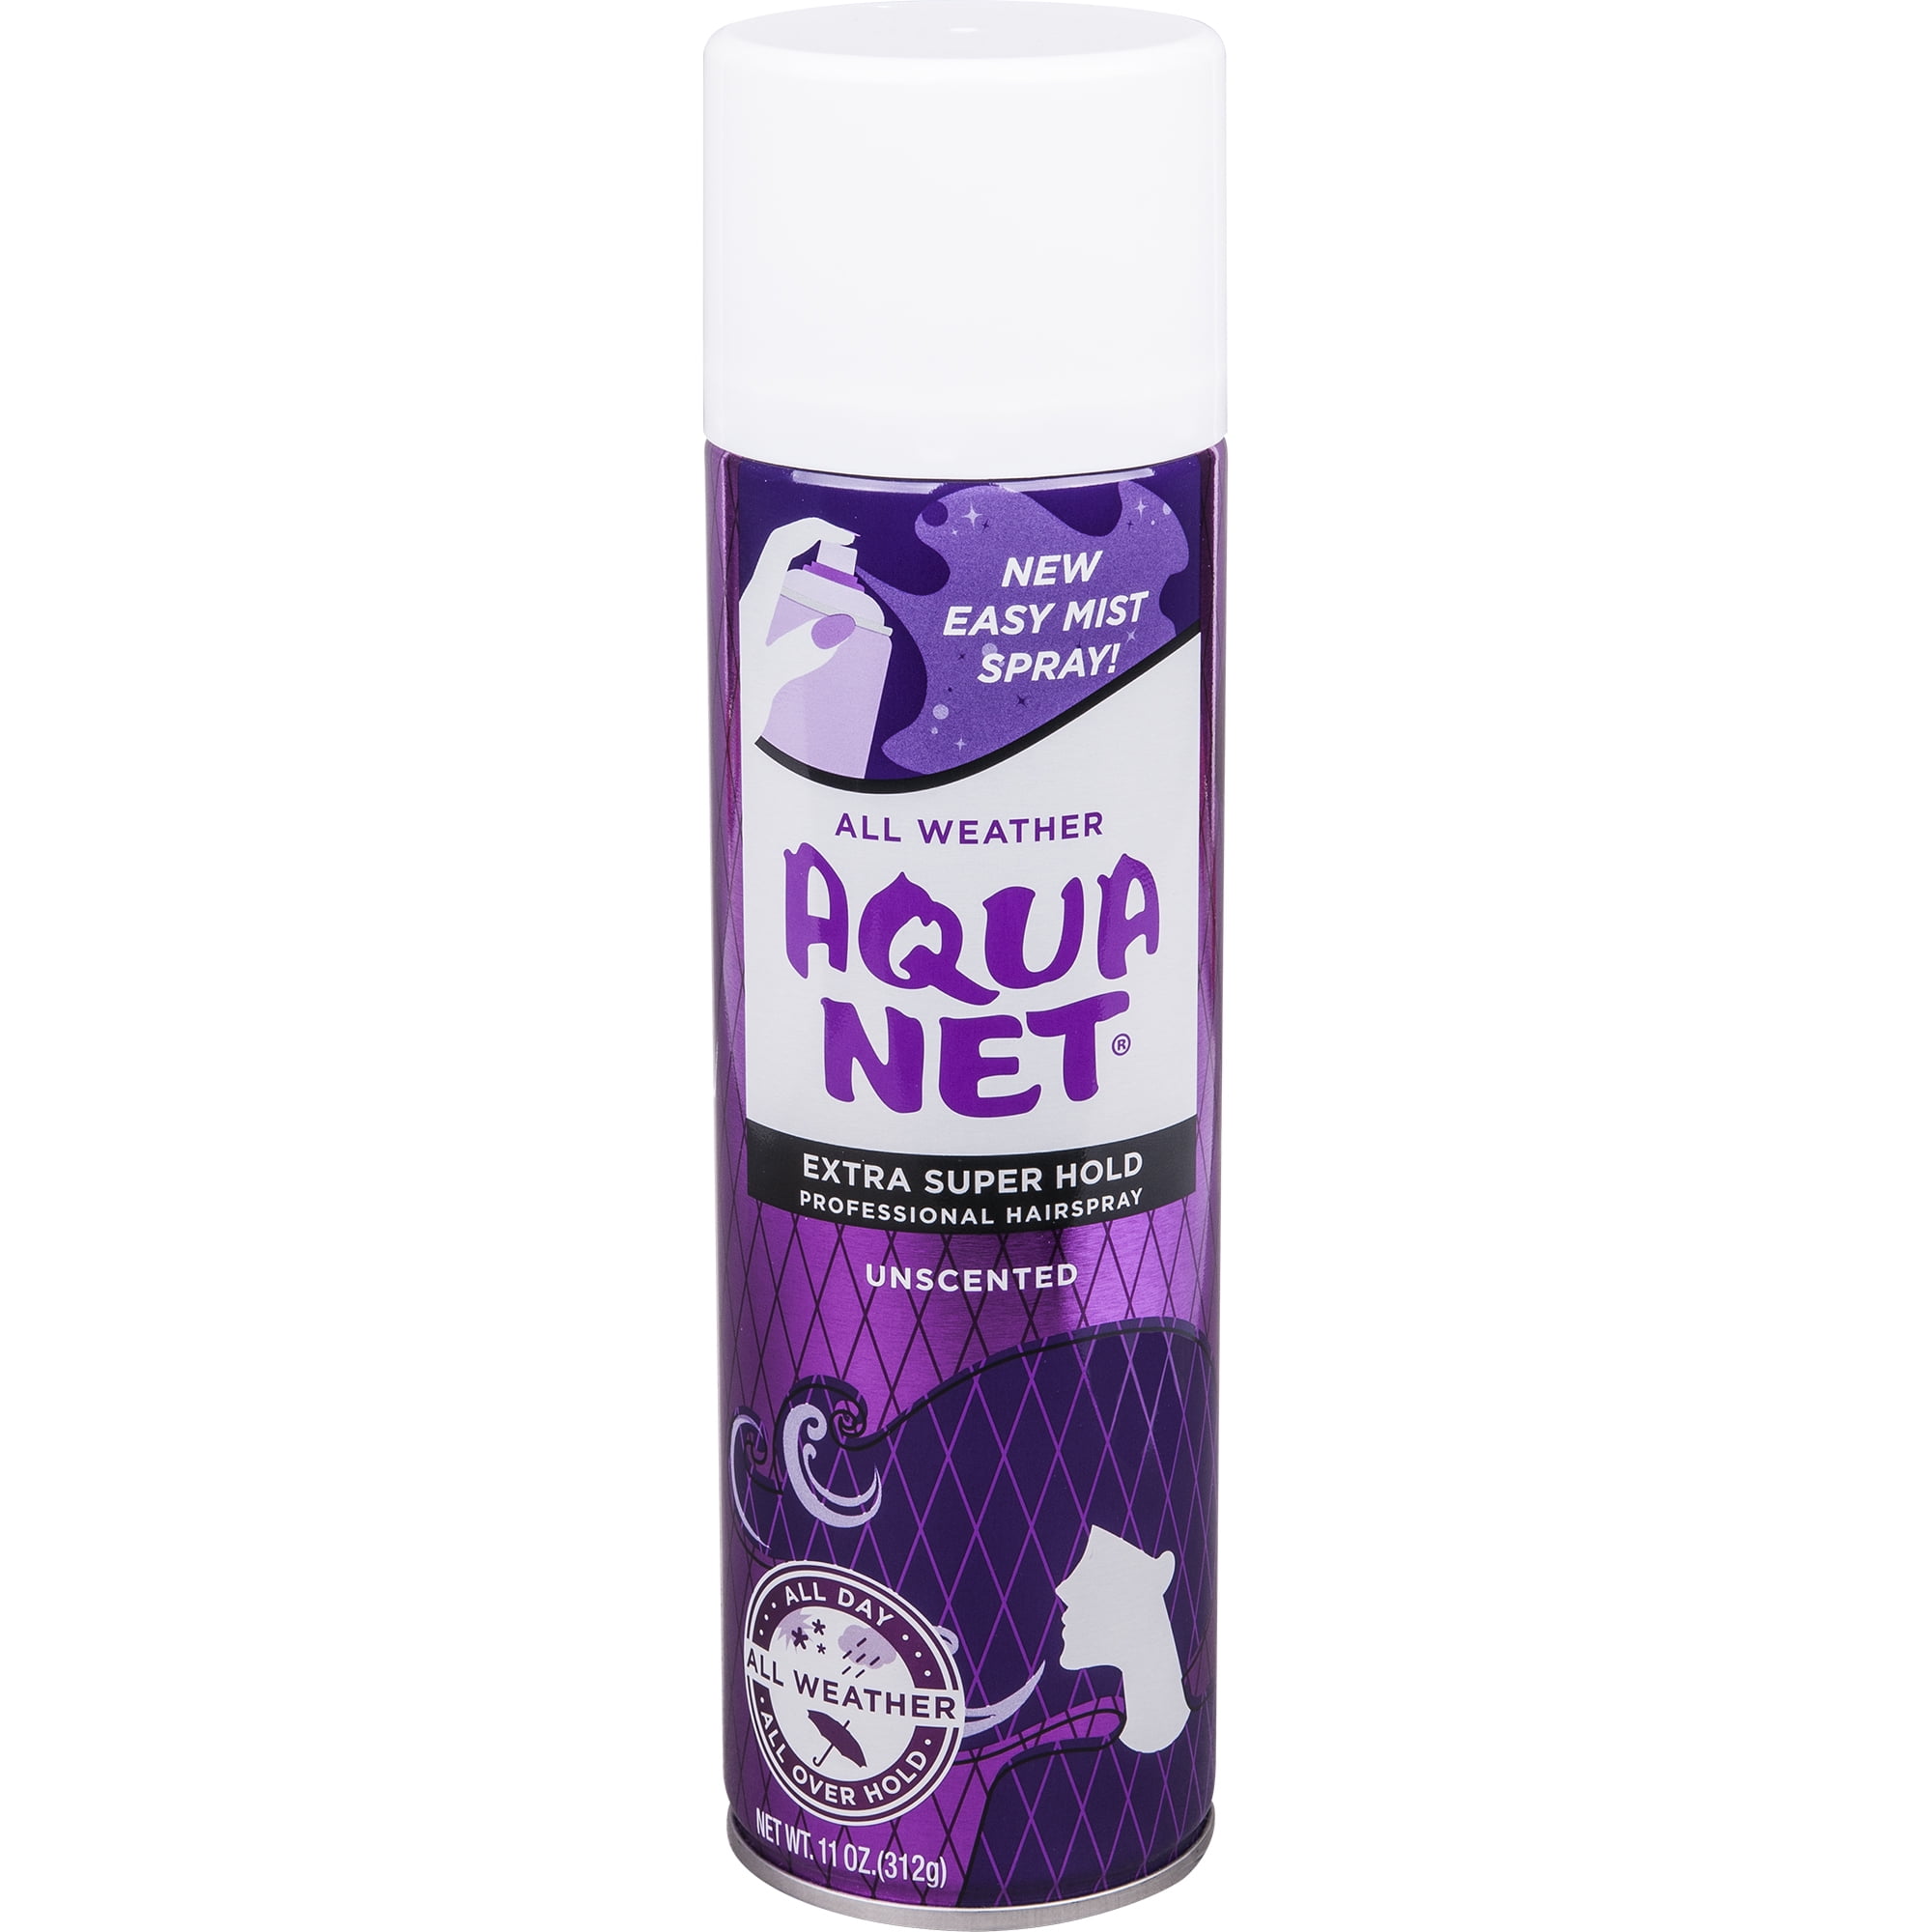 Aqua Net All Weather Hair Spray Extra Super Hold, Unscented, 11 oz